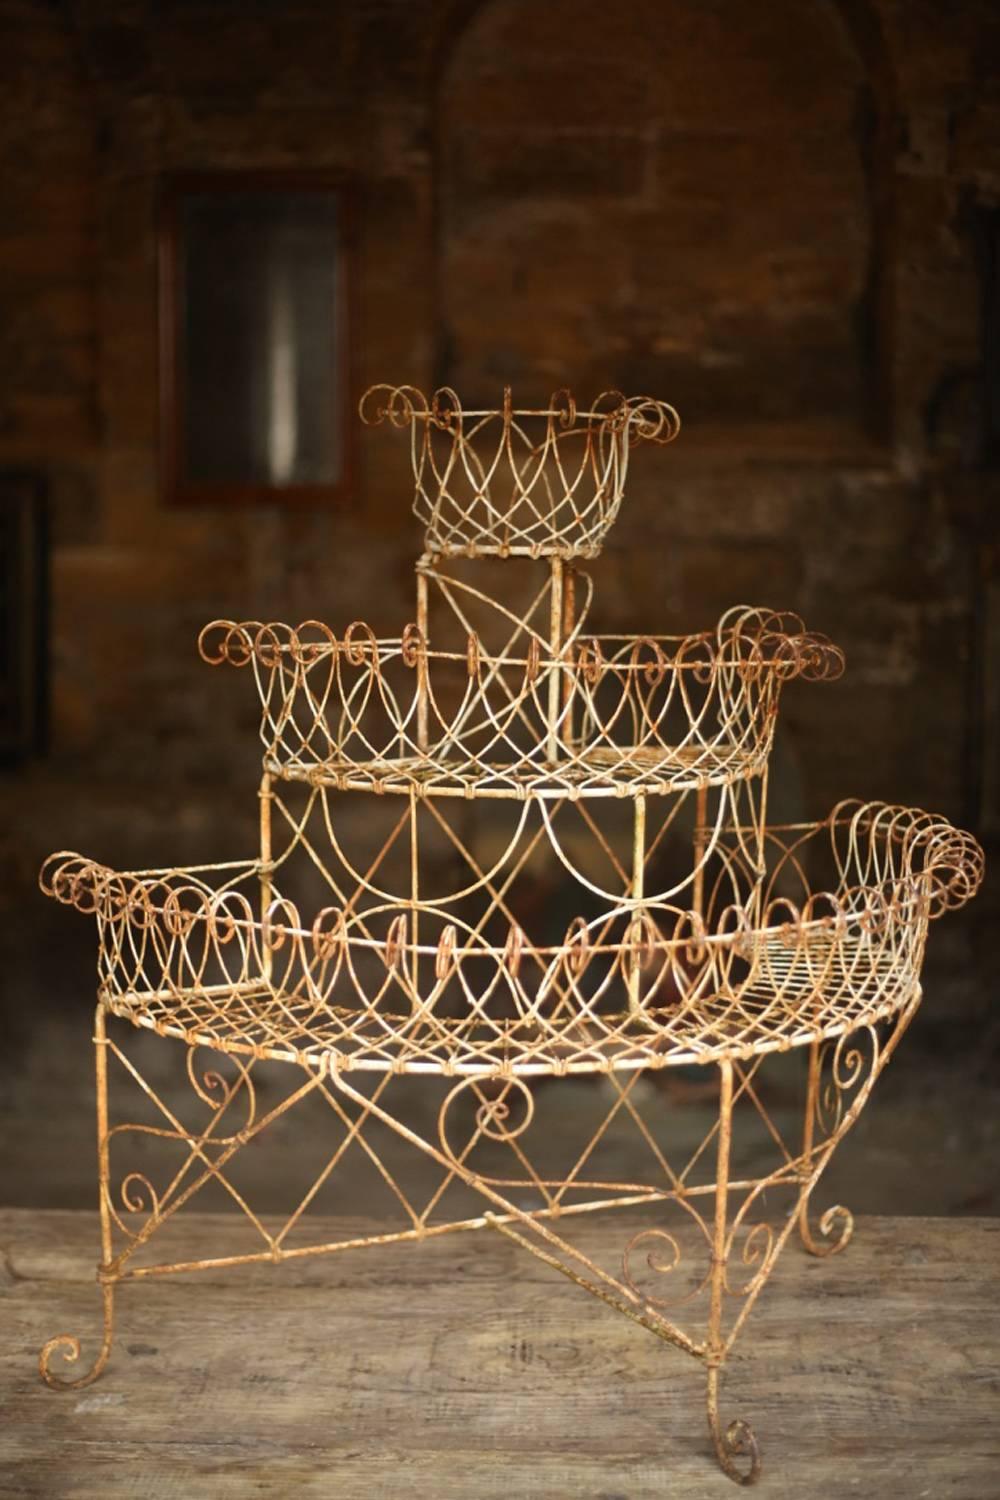 This is an exceptional Regency/early Victorian wirework plant stand. It came from an estate in Scotland with another wirework planter currently for sale. This one is simply superb. It is in untouched condition with no damage or faults and is very